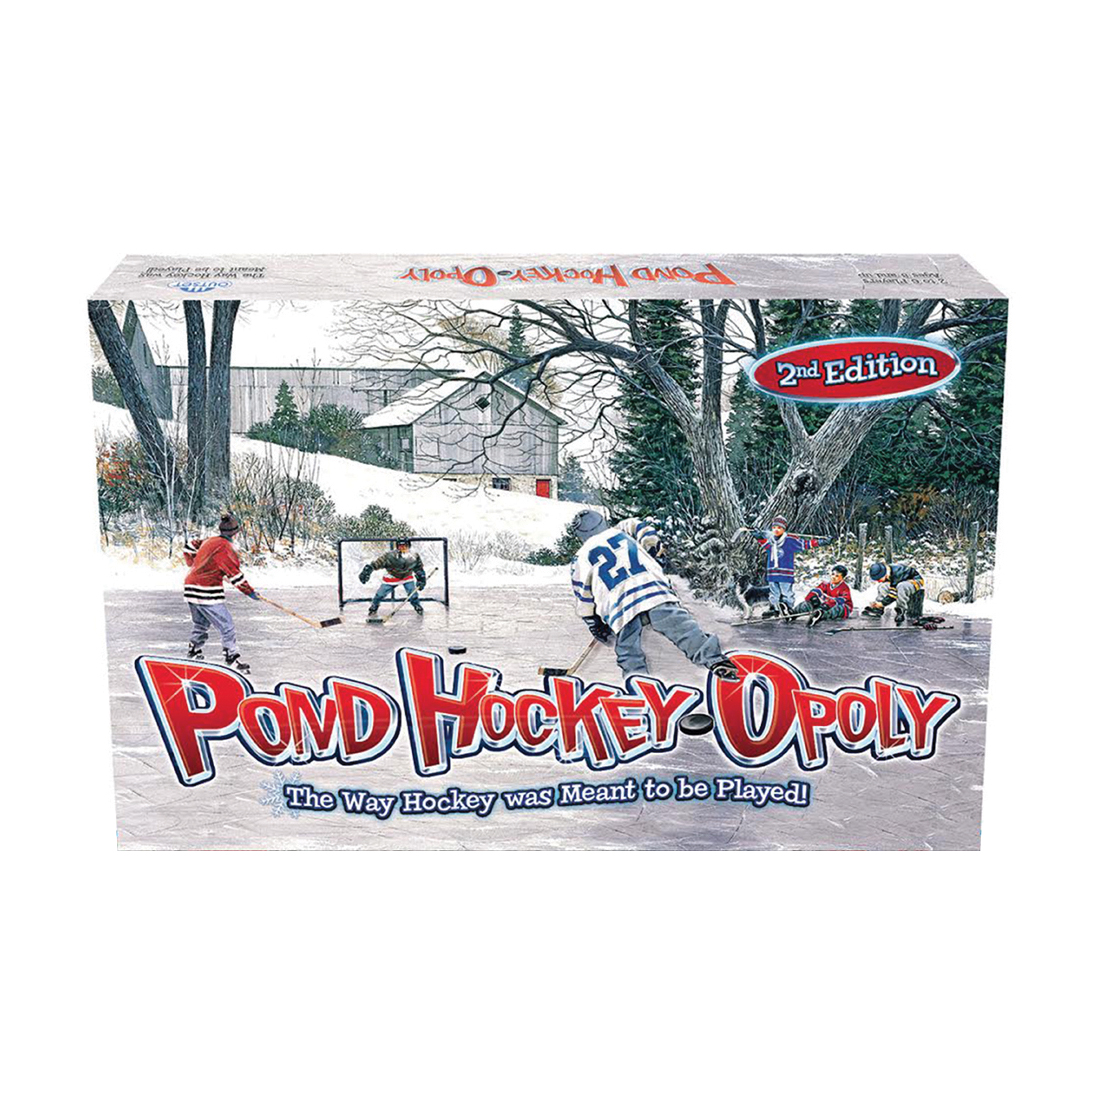 Outset Media Pond Hockey-opoly - 2nd Edition